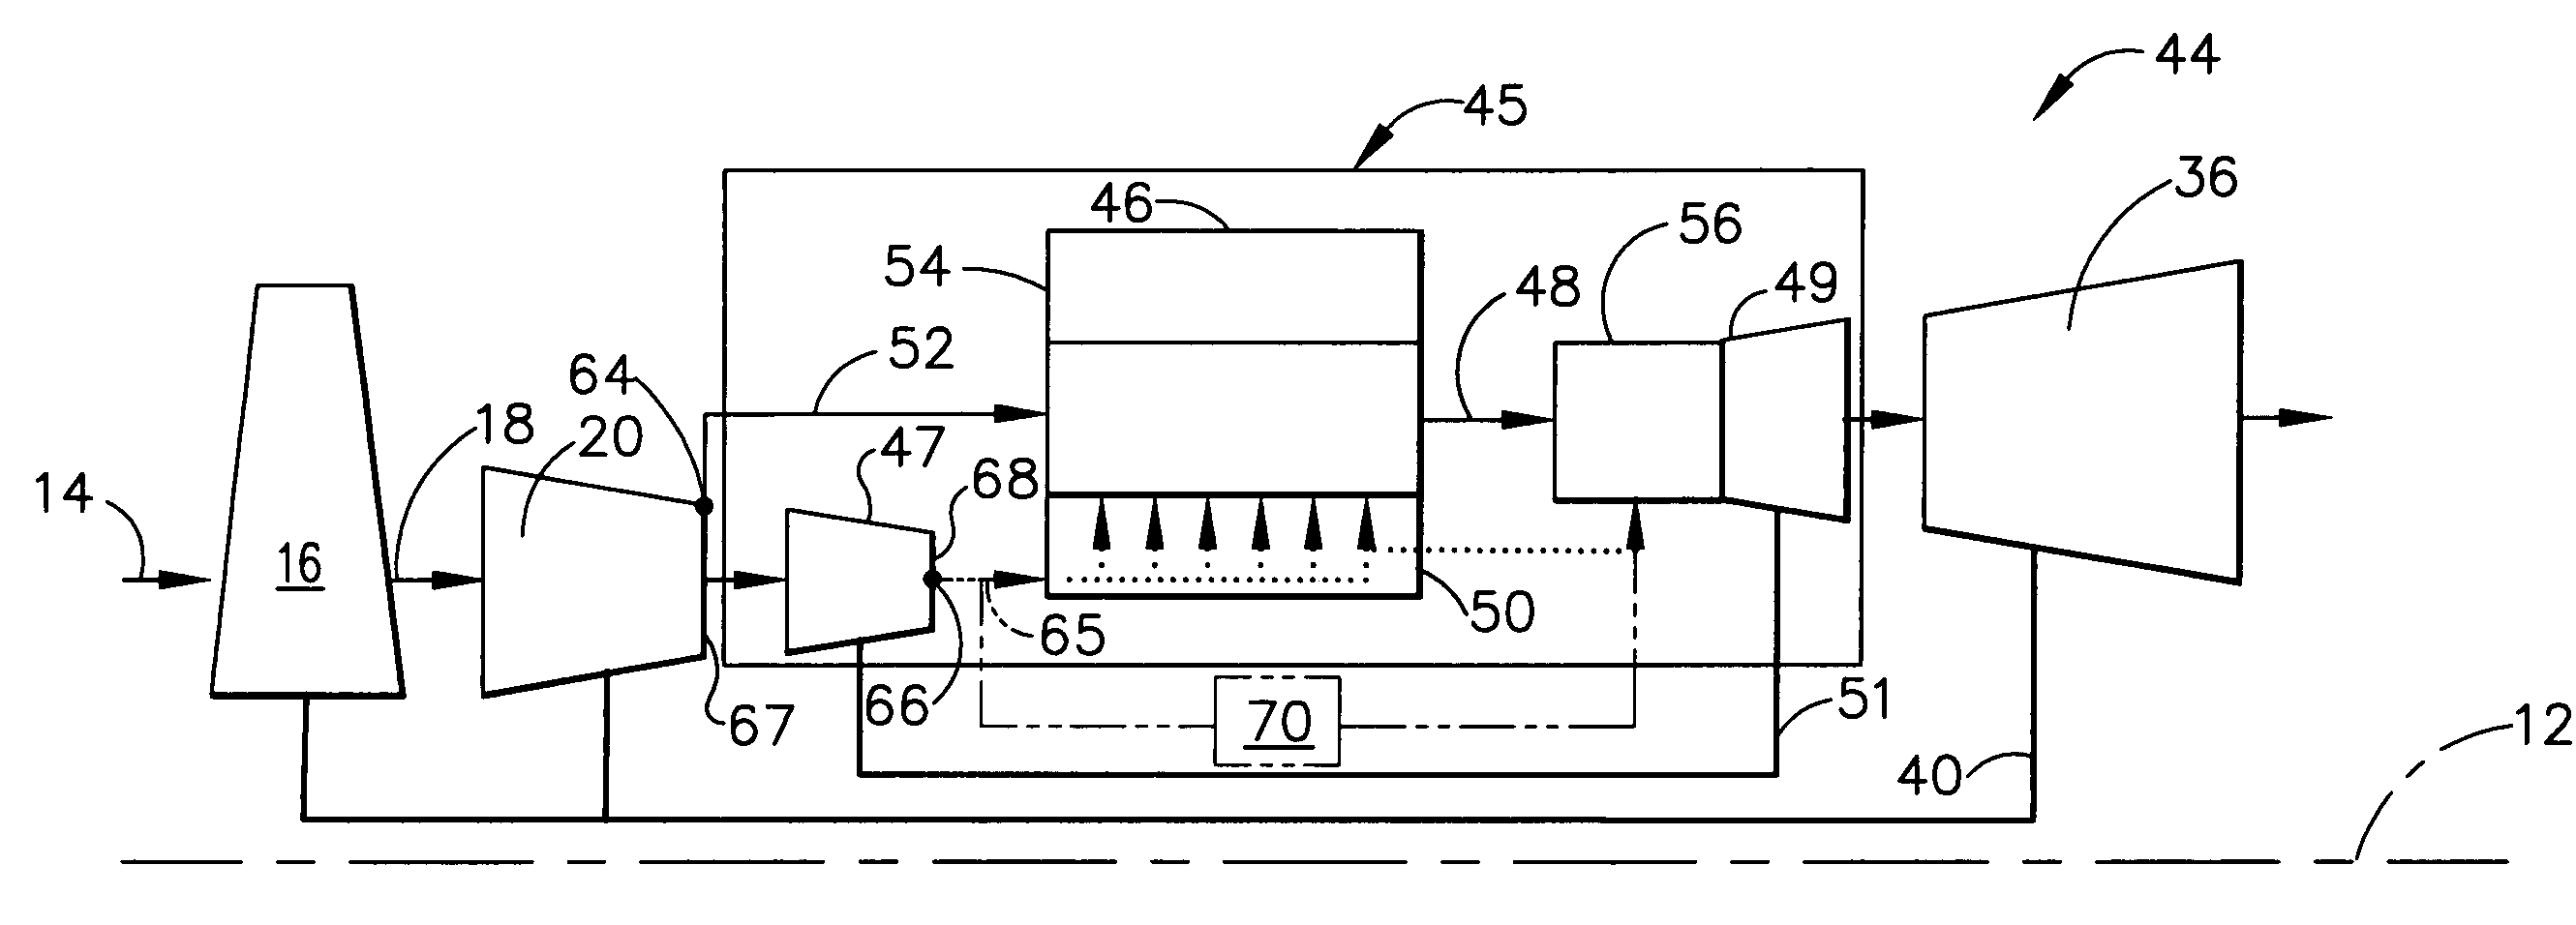 High thrust gas turbine engine with improved core system